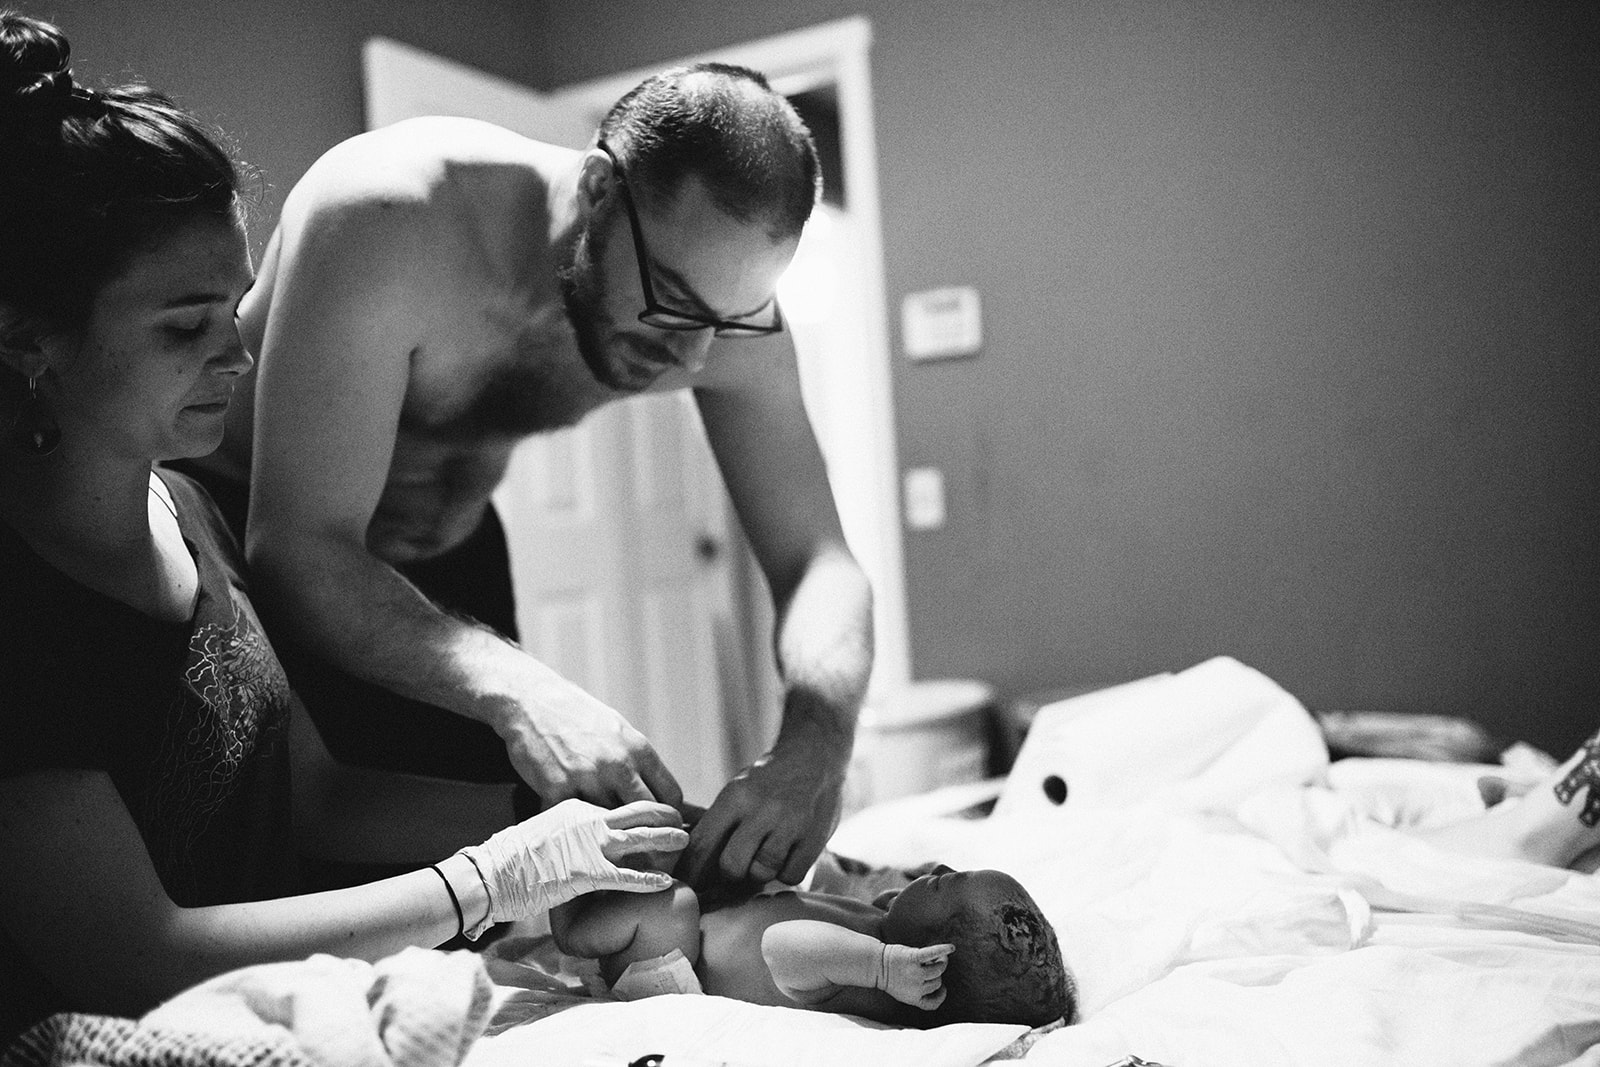 Midwife Lucy French assists a new father to diaper his child at a home birth.